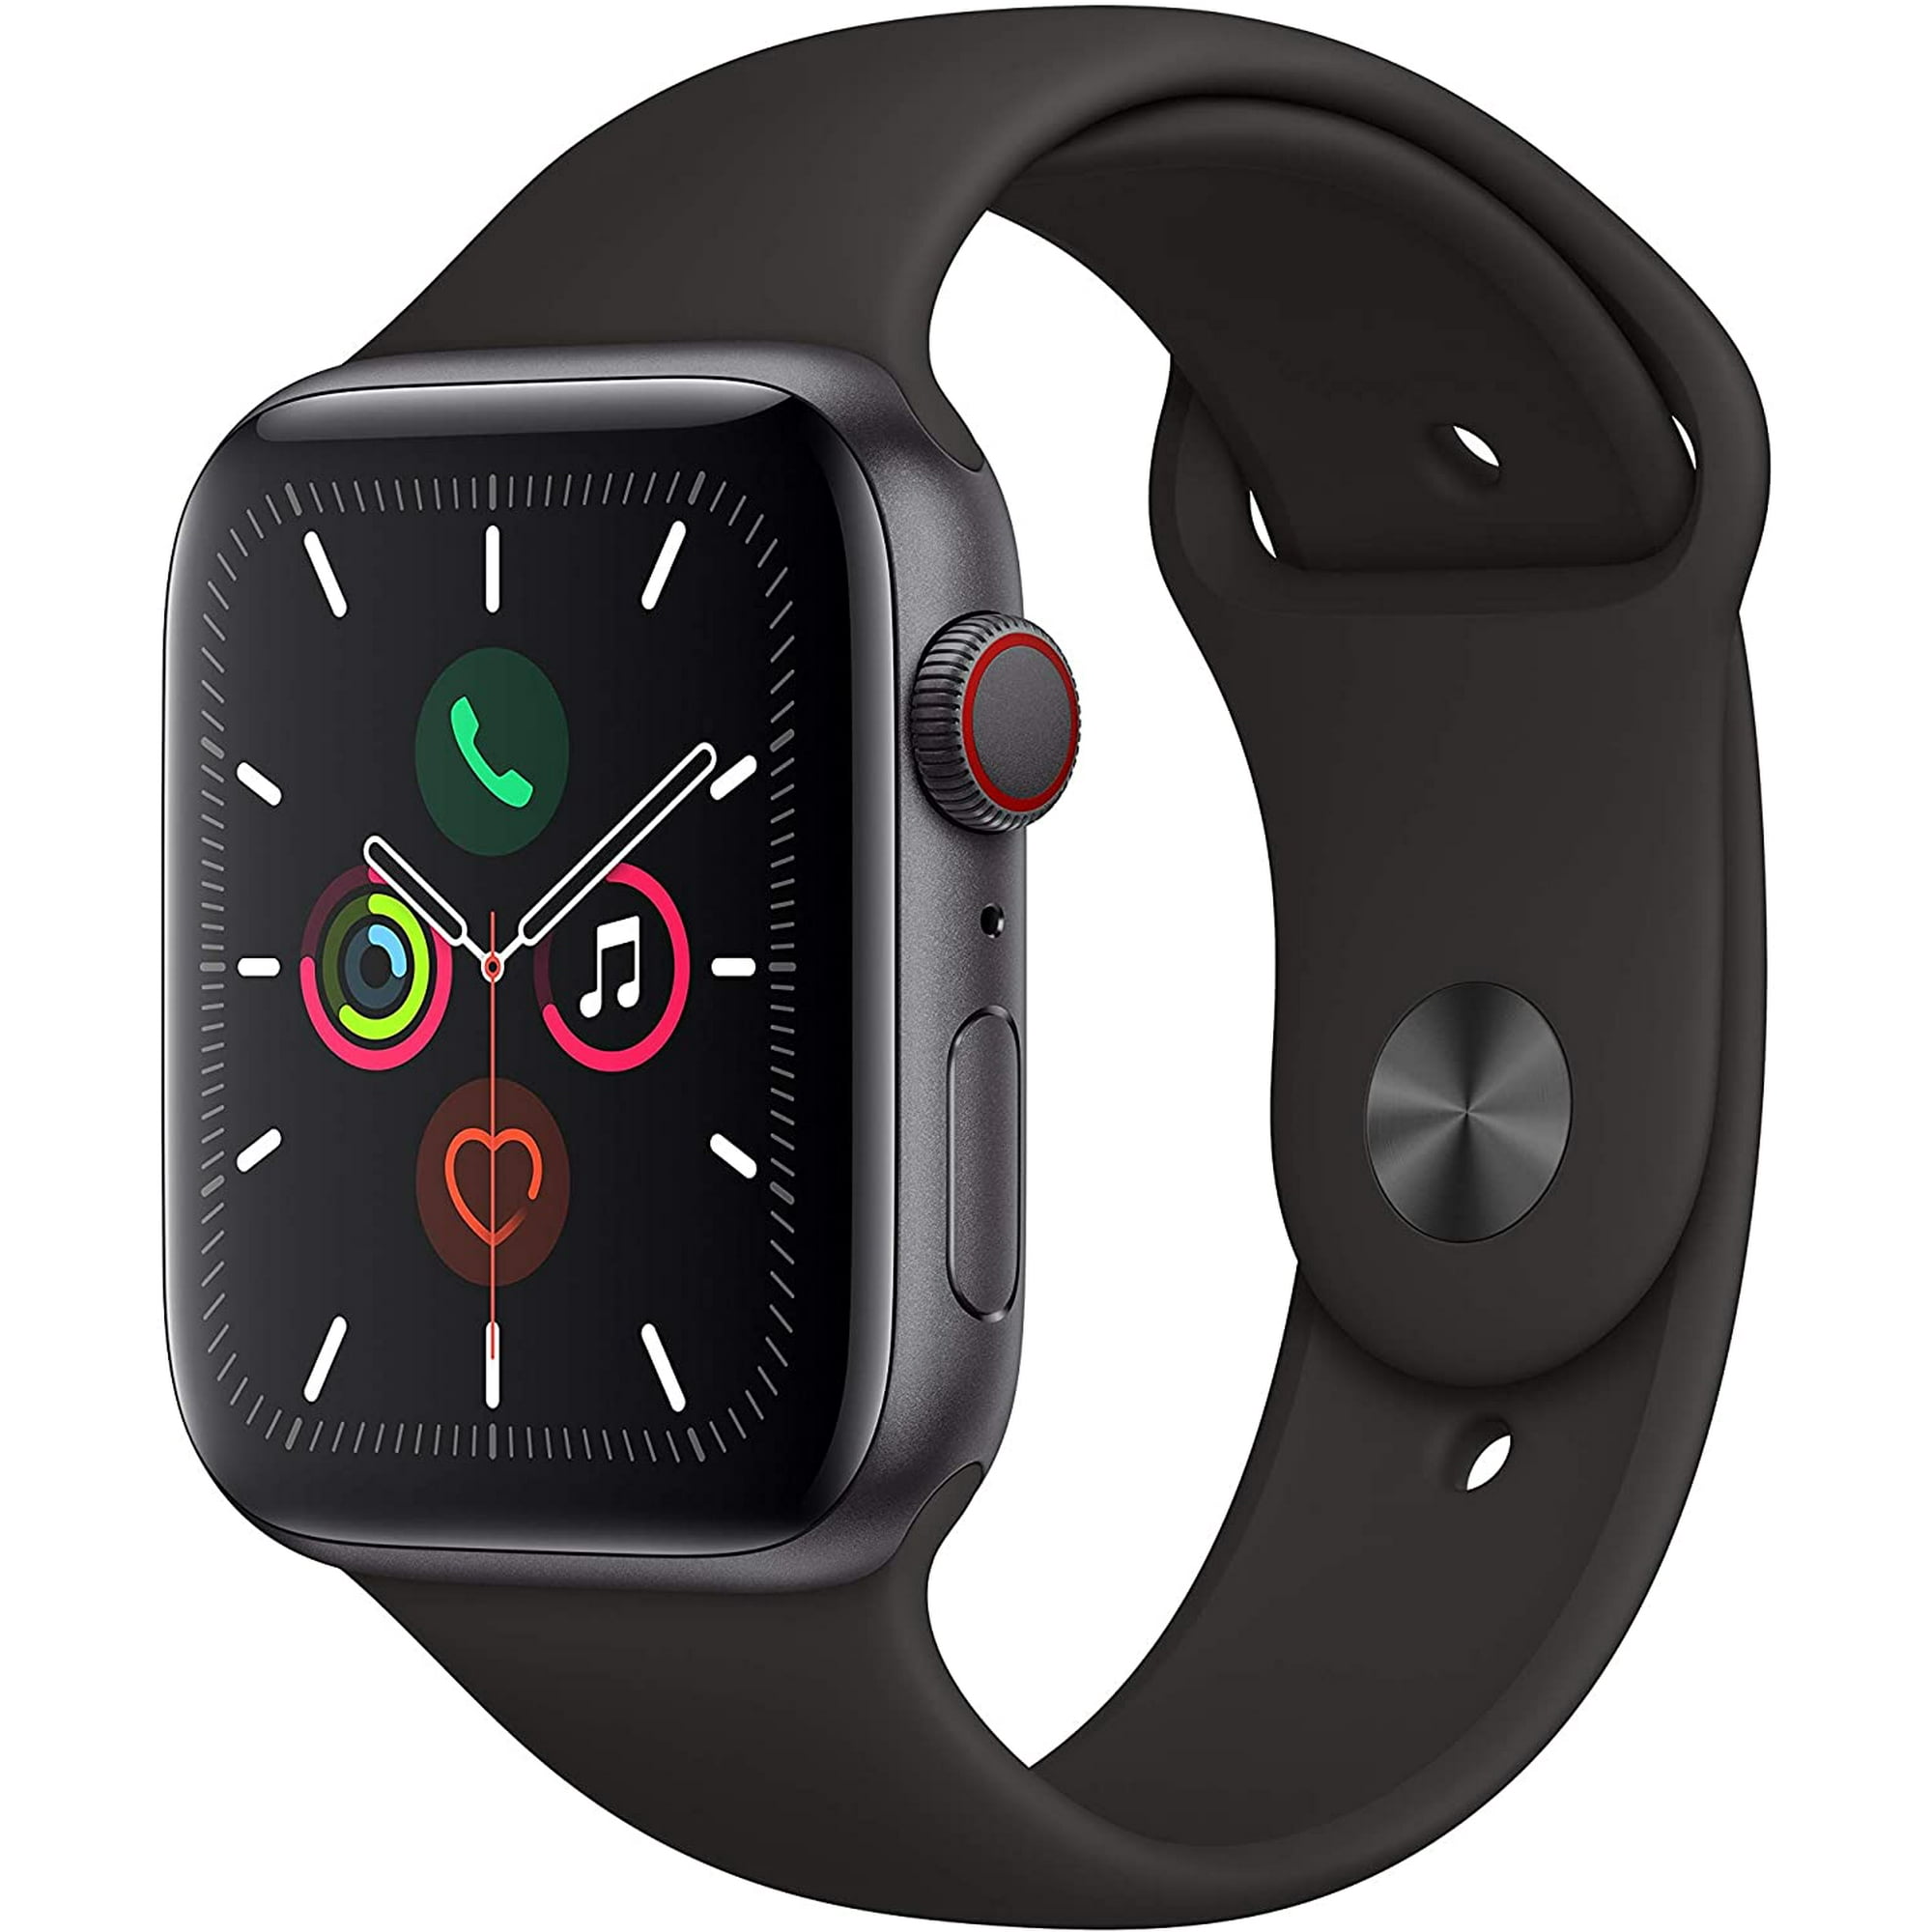 Refurbished Apple Watch Series 5 (GPS + Cellular, 40mm) - Space Gray  Aluminum Case with Black Sport Band